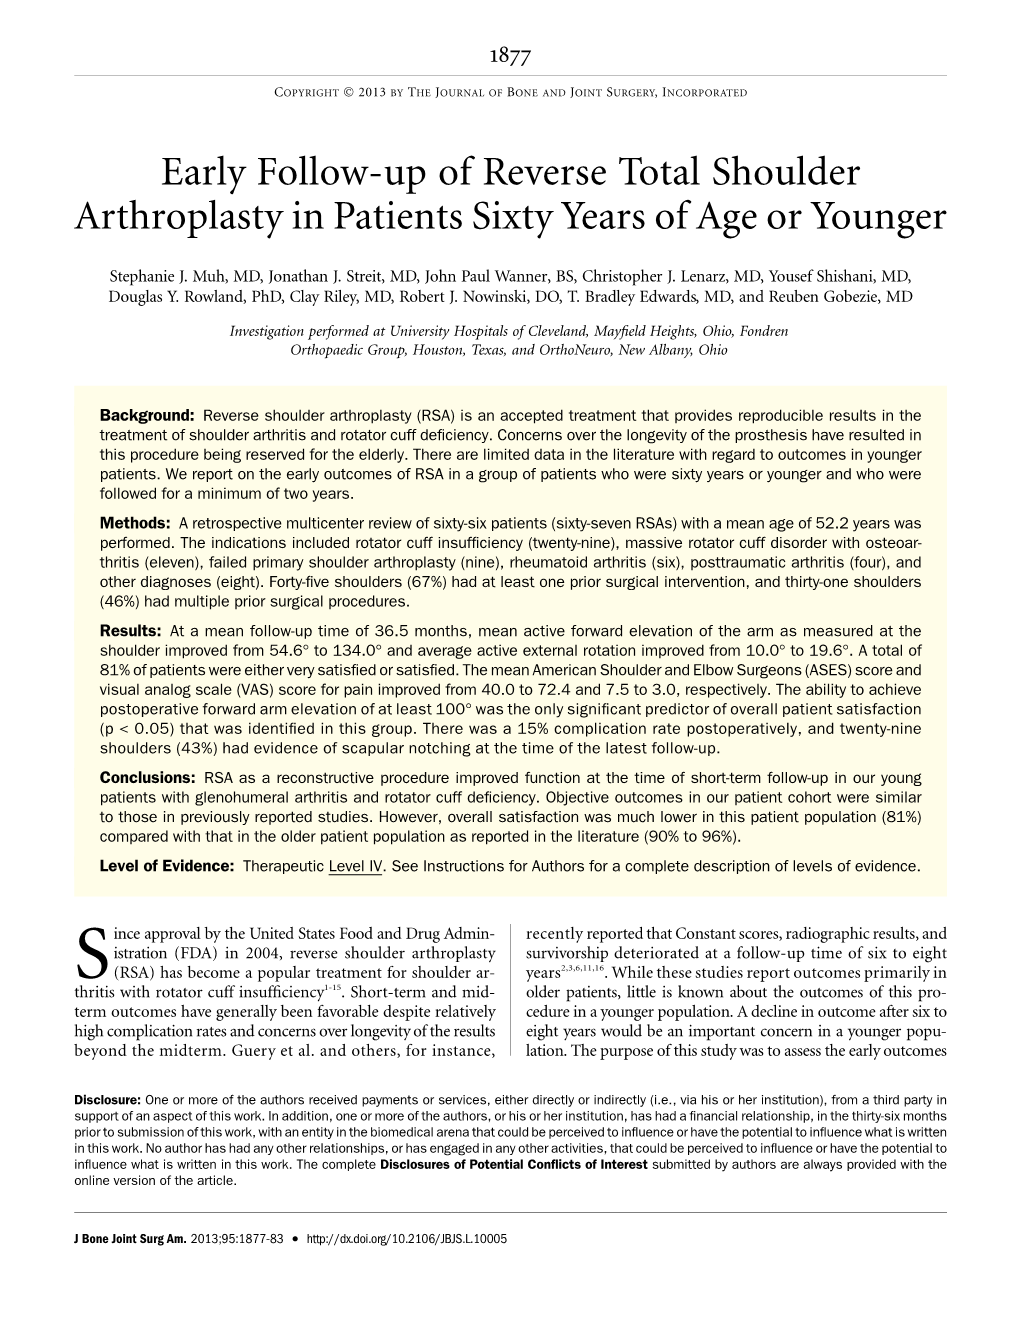 Early Follow-Up of Reverse Total Shoulder Arthroplasty in Patients Sixty Years of Age Or Younger